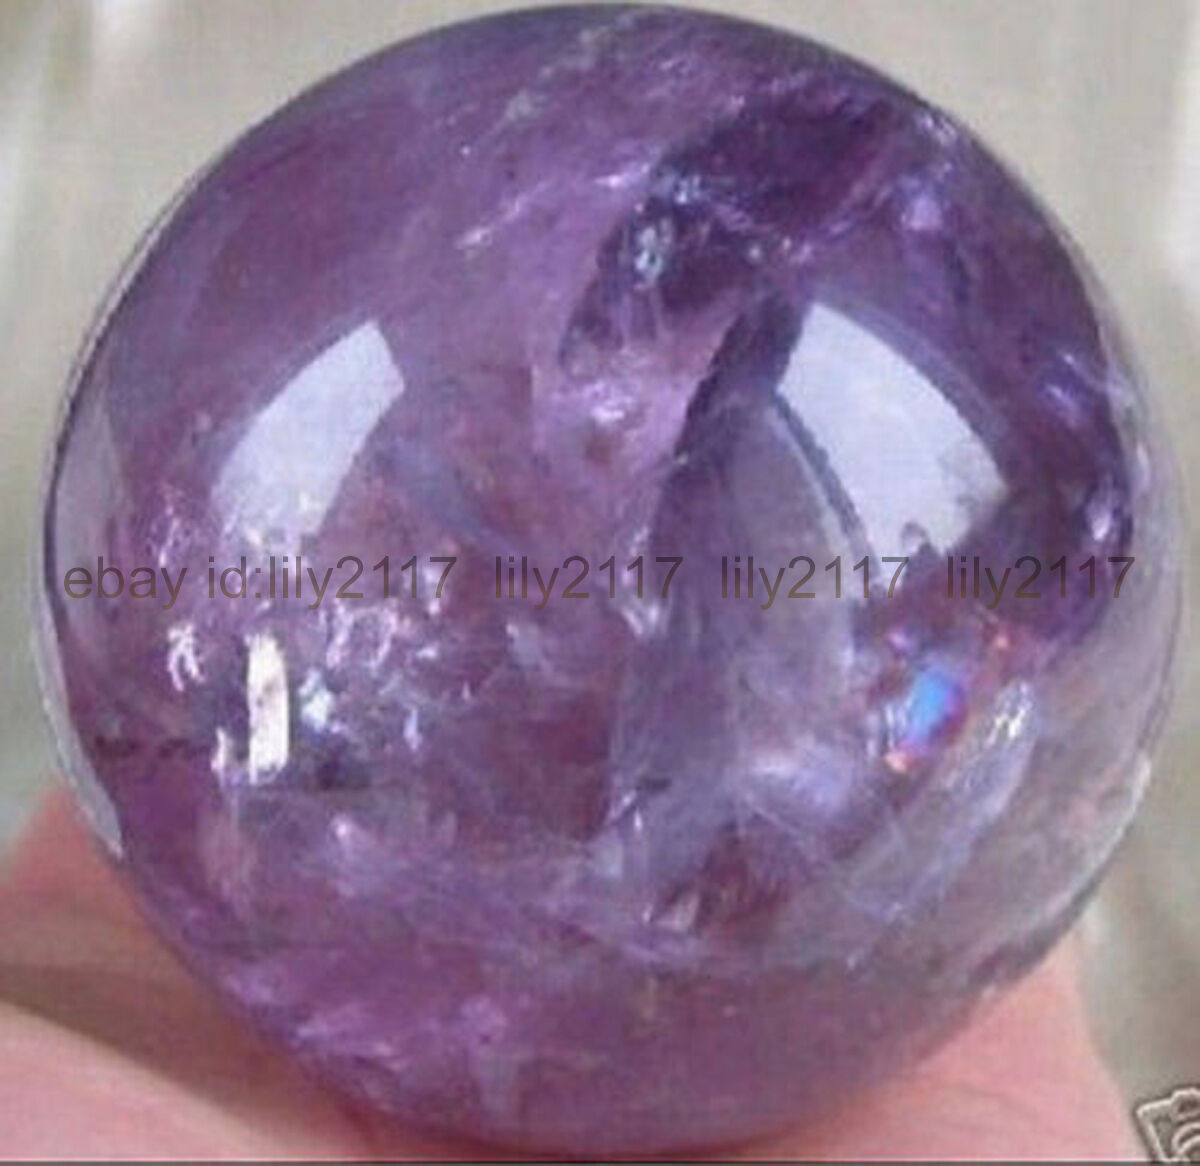 AAA+ Natural Amethyst Quartz Crystal Sphere Ball Healing Stone 40mm + Stand